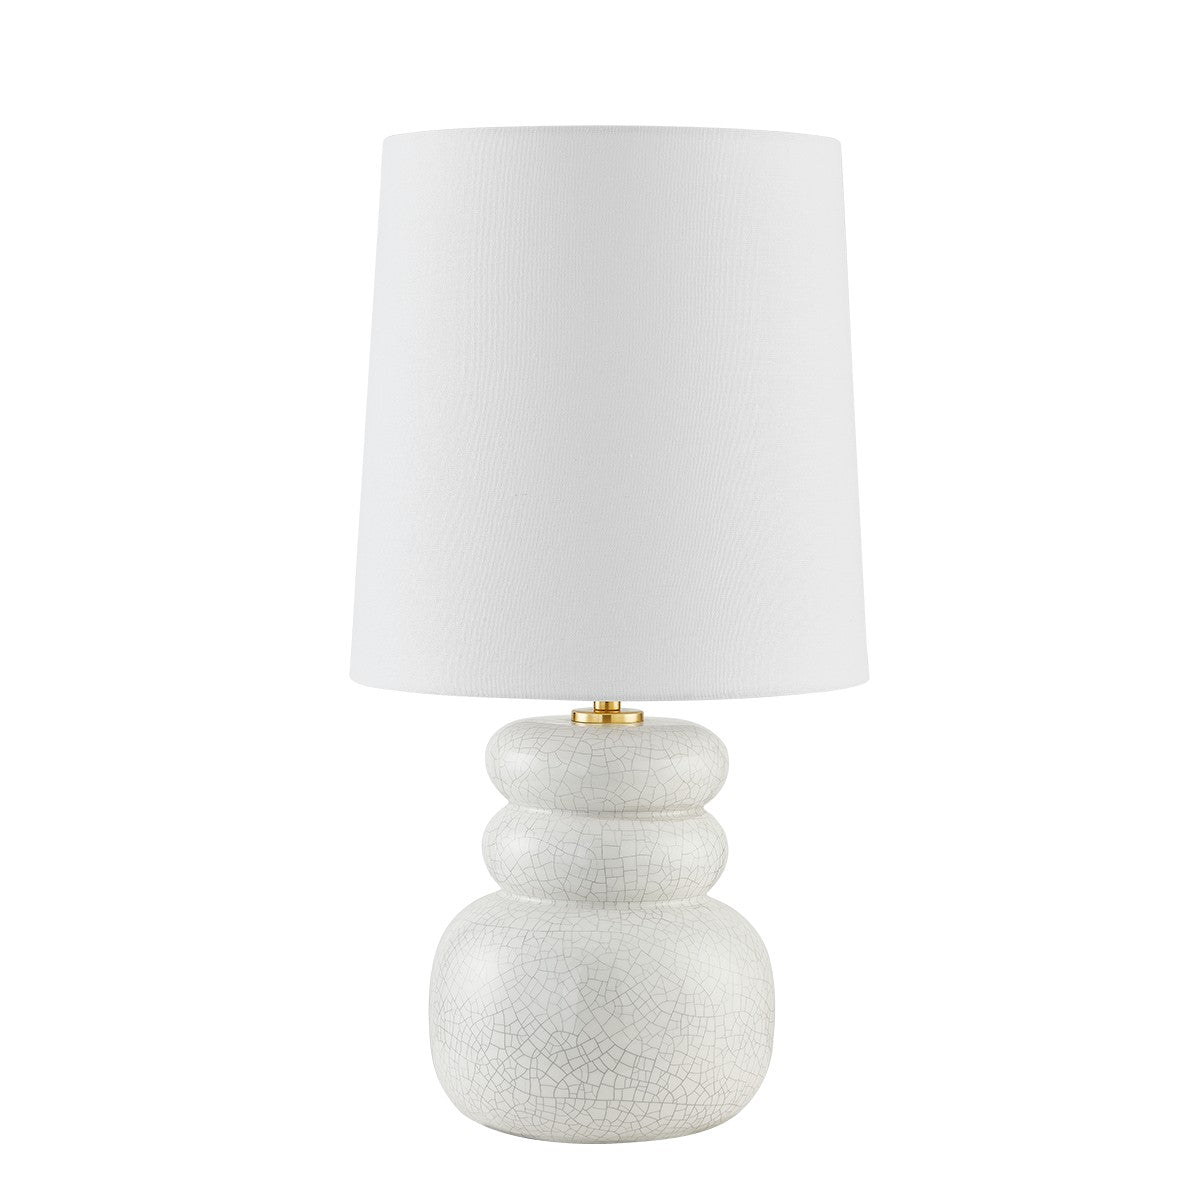 Mitzi - HL889201-AGB/CPC - One Light Table Lamp - Corinne - Aged Brass/Ceramic Peignoir Crackle